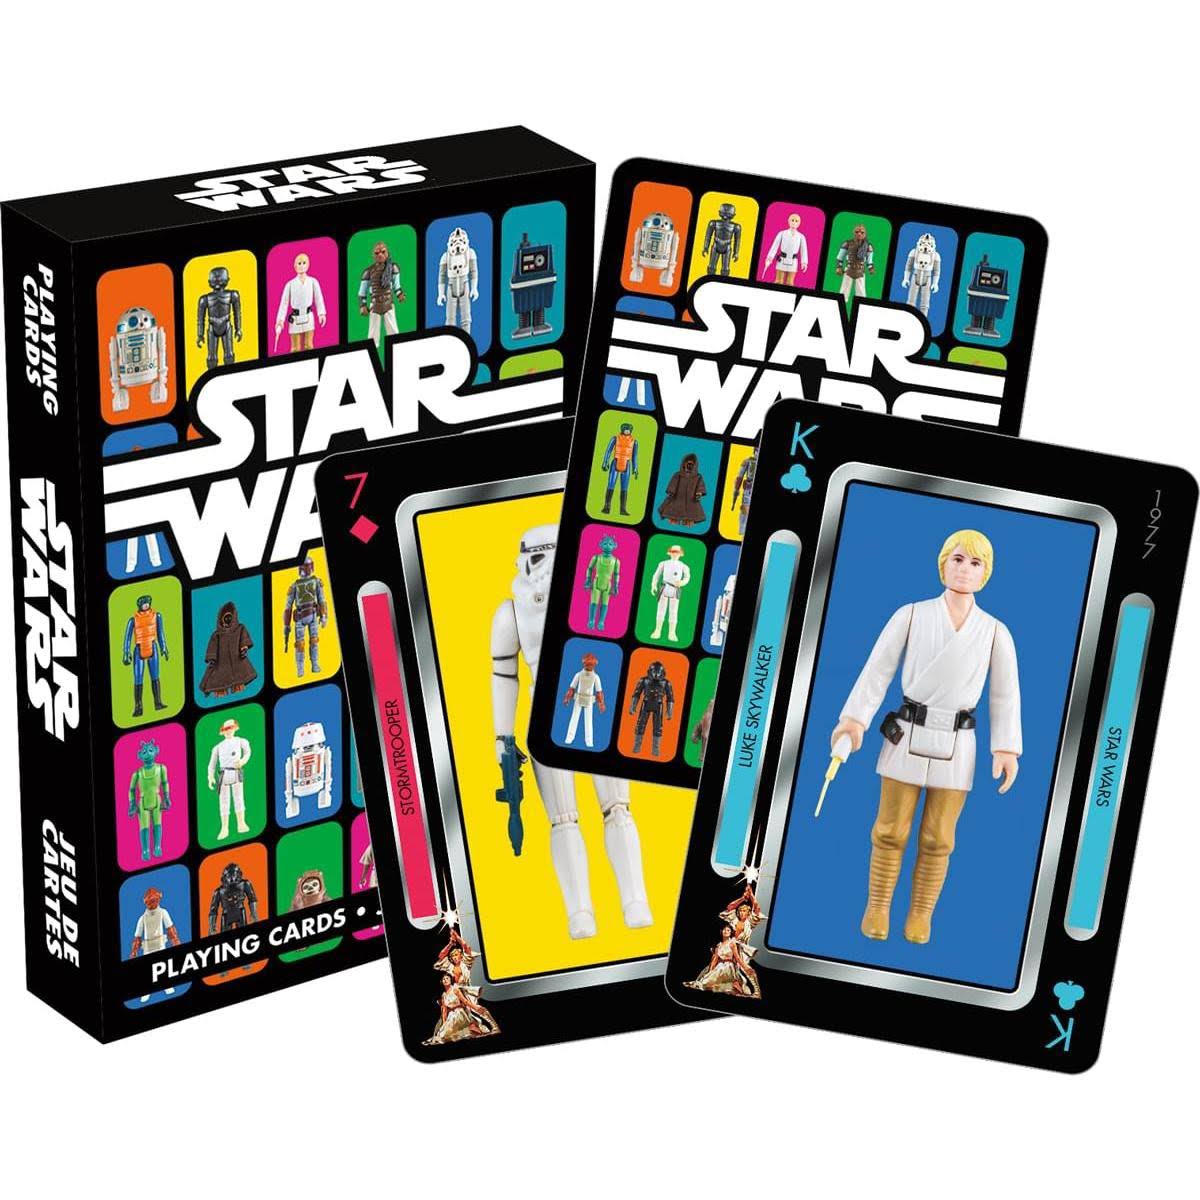 Star Wars - Action Figures Playing Cards